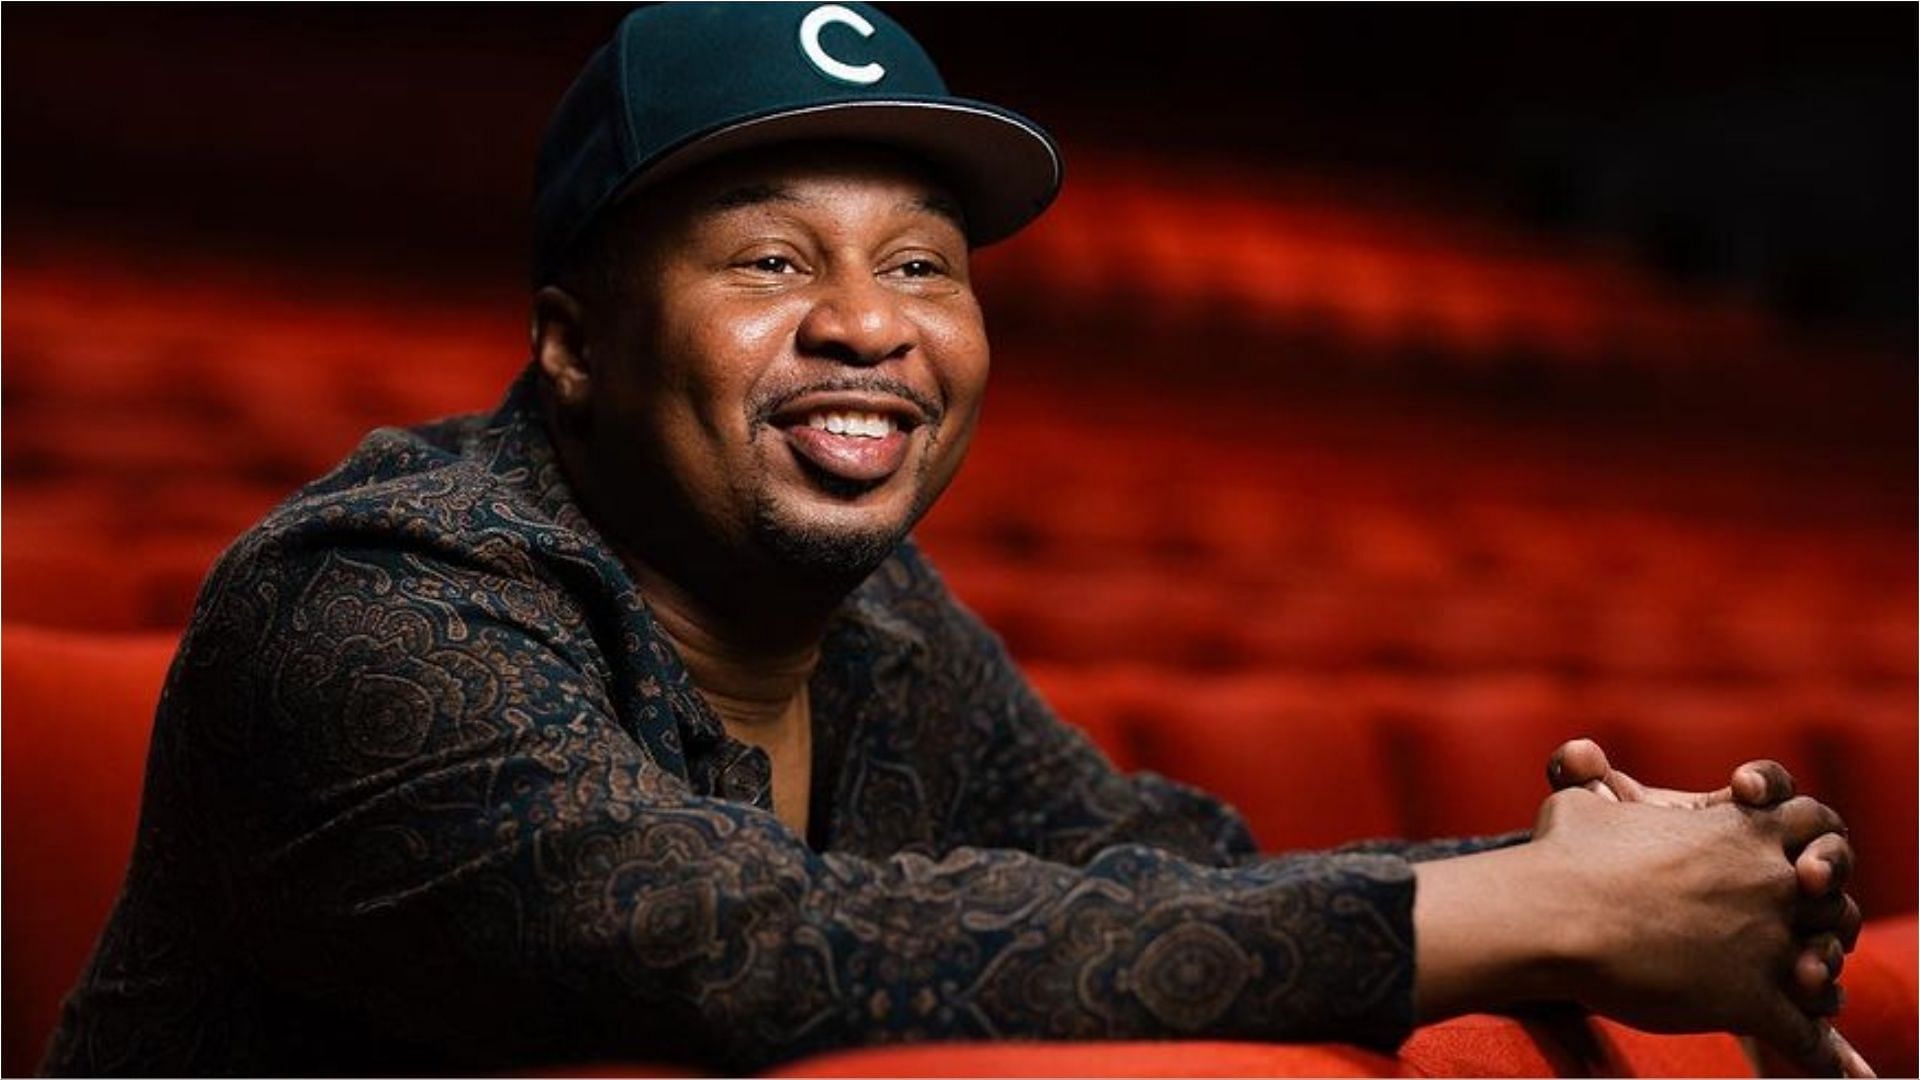 Roy Wood Jr. has earned a lot from his career in the entertainment industry (Image via roywoodjr/Instagram)